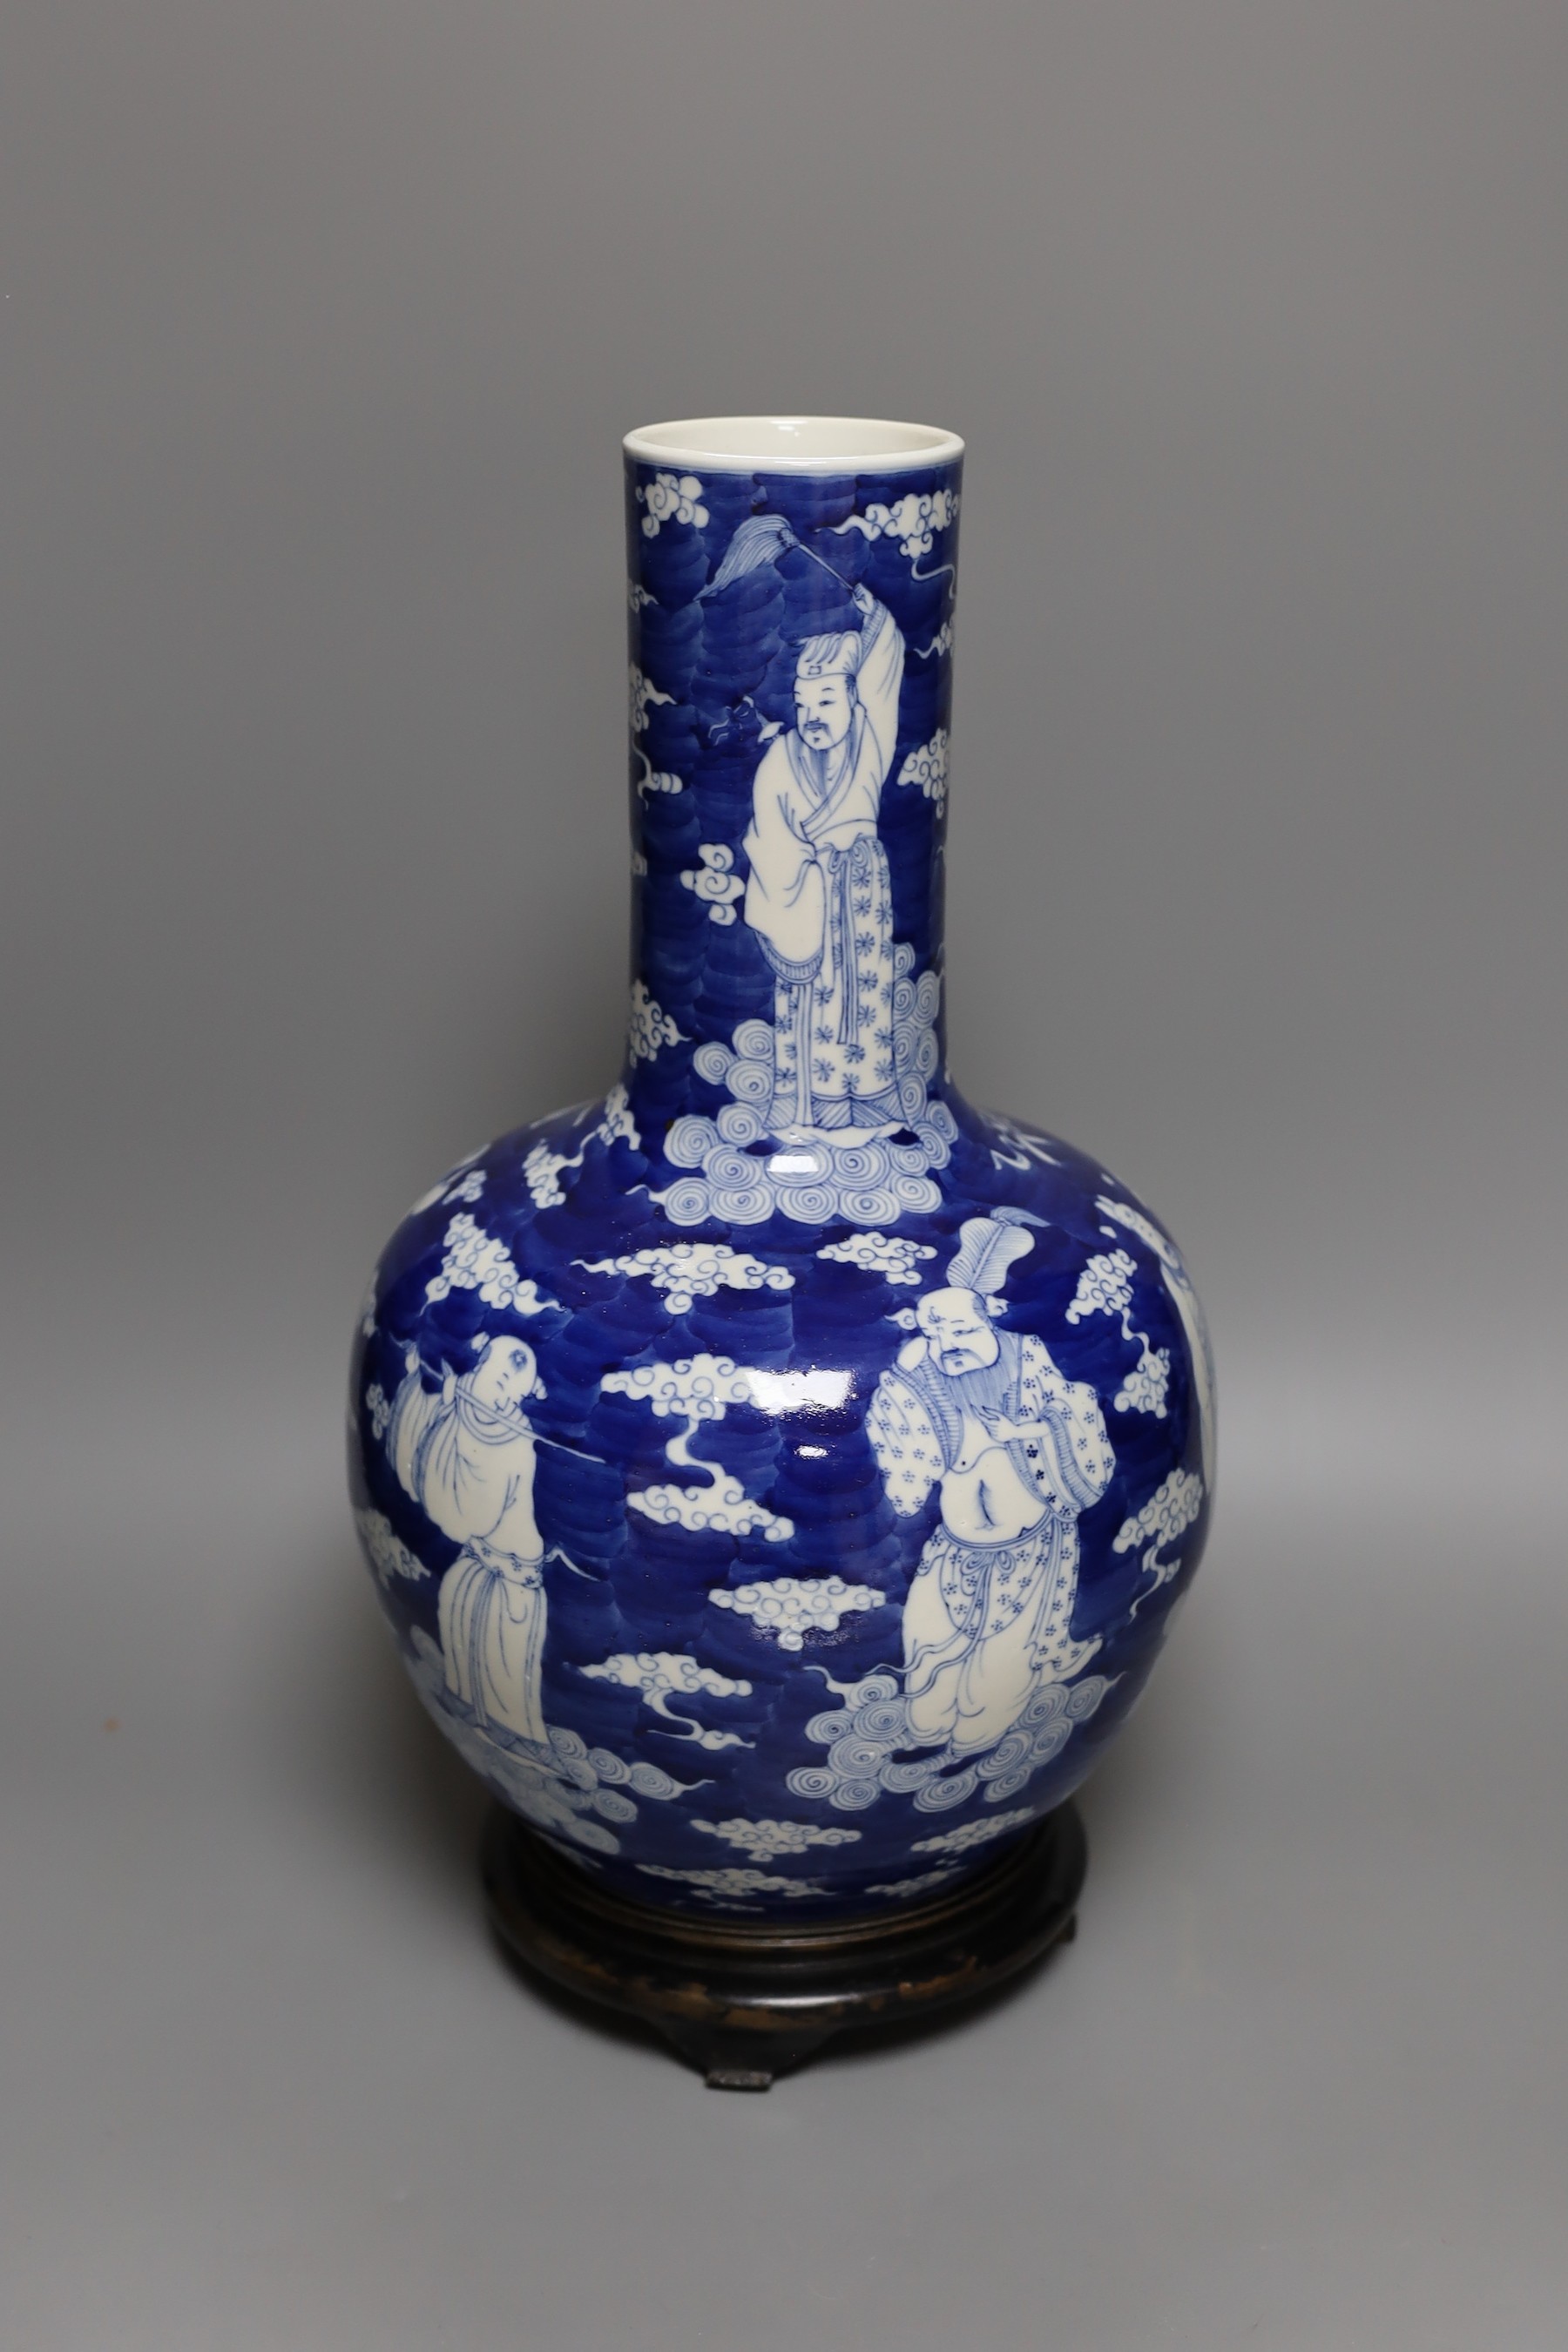 A Chinese baluster vase in underglaze blue, on stand, total height 40cm